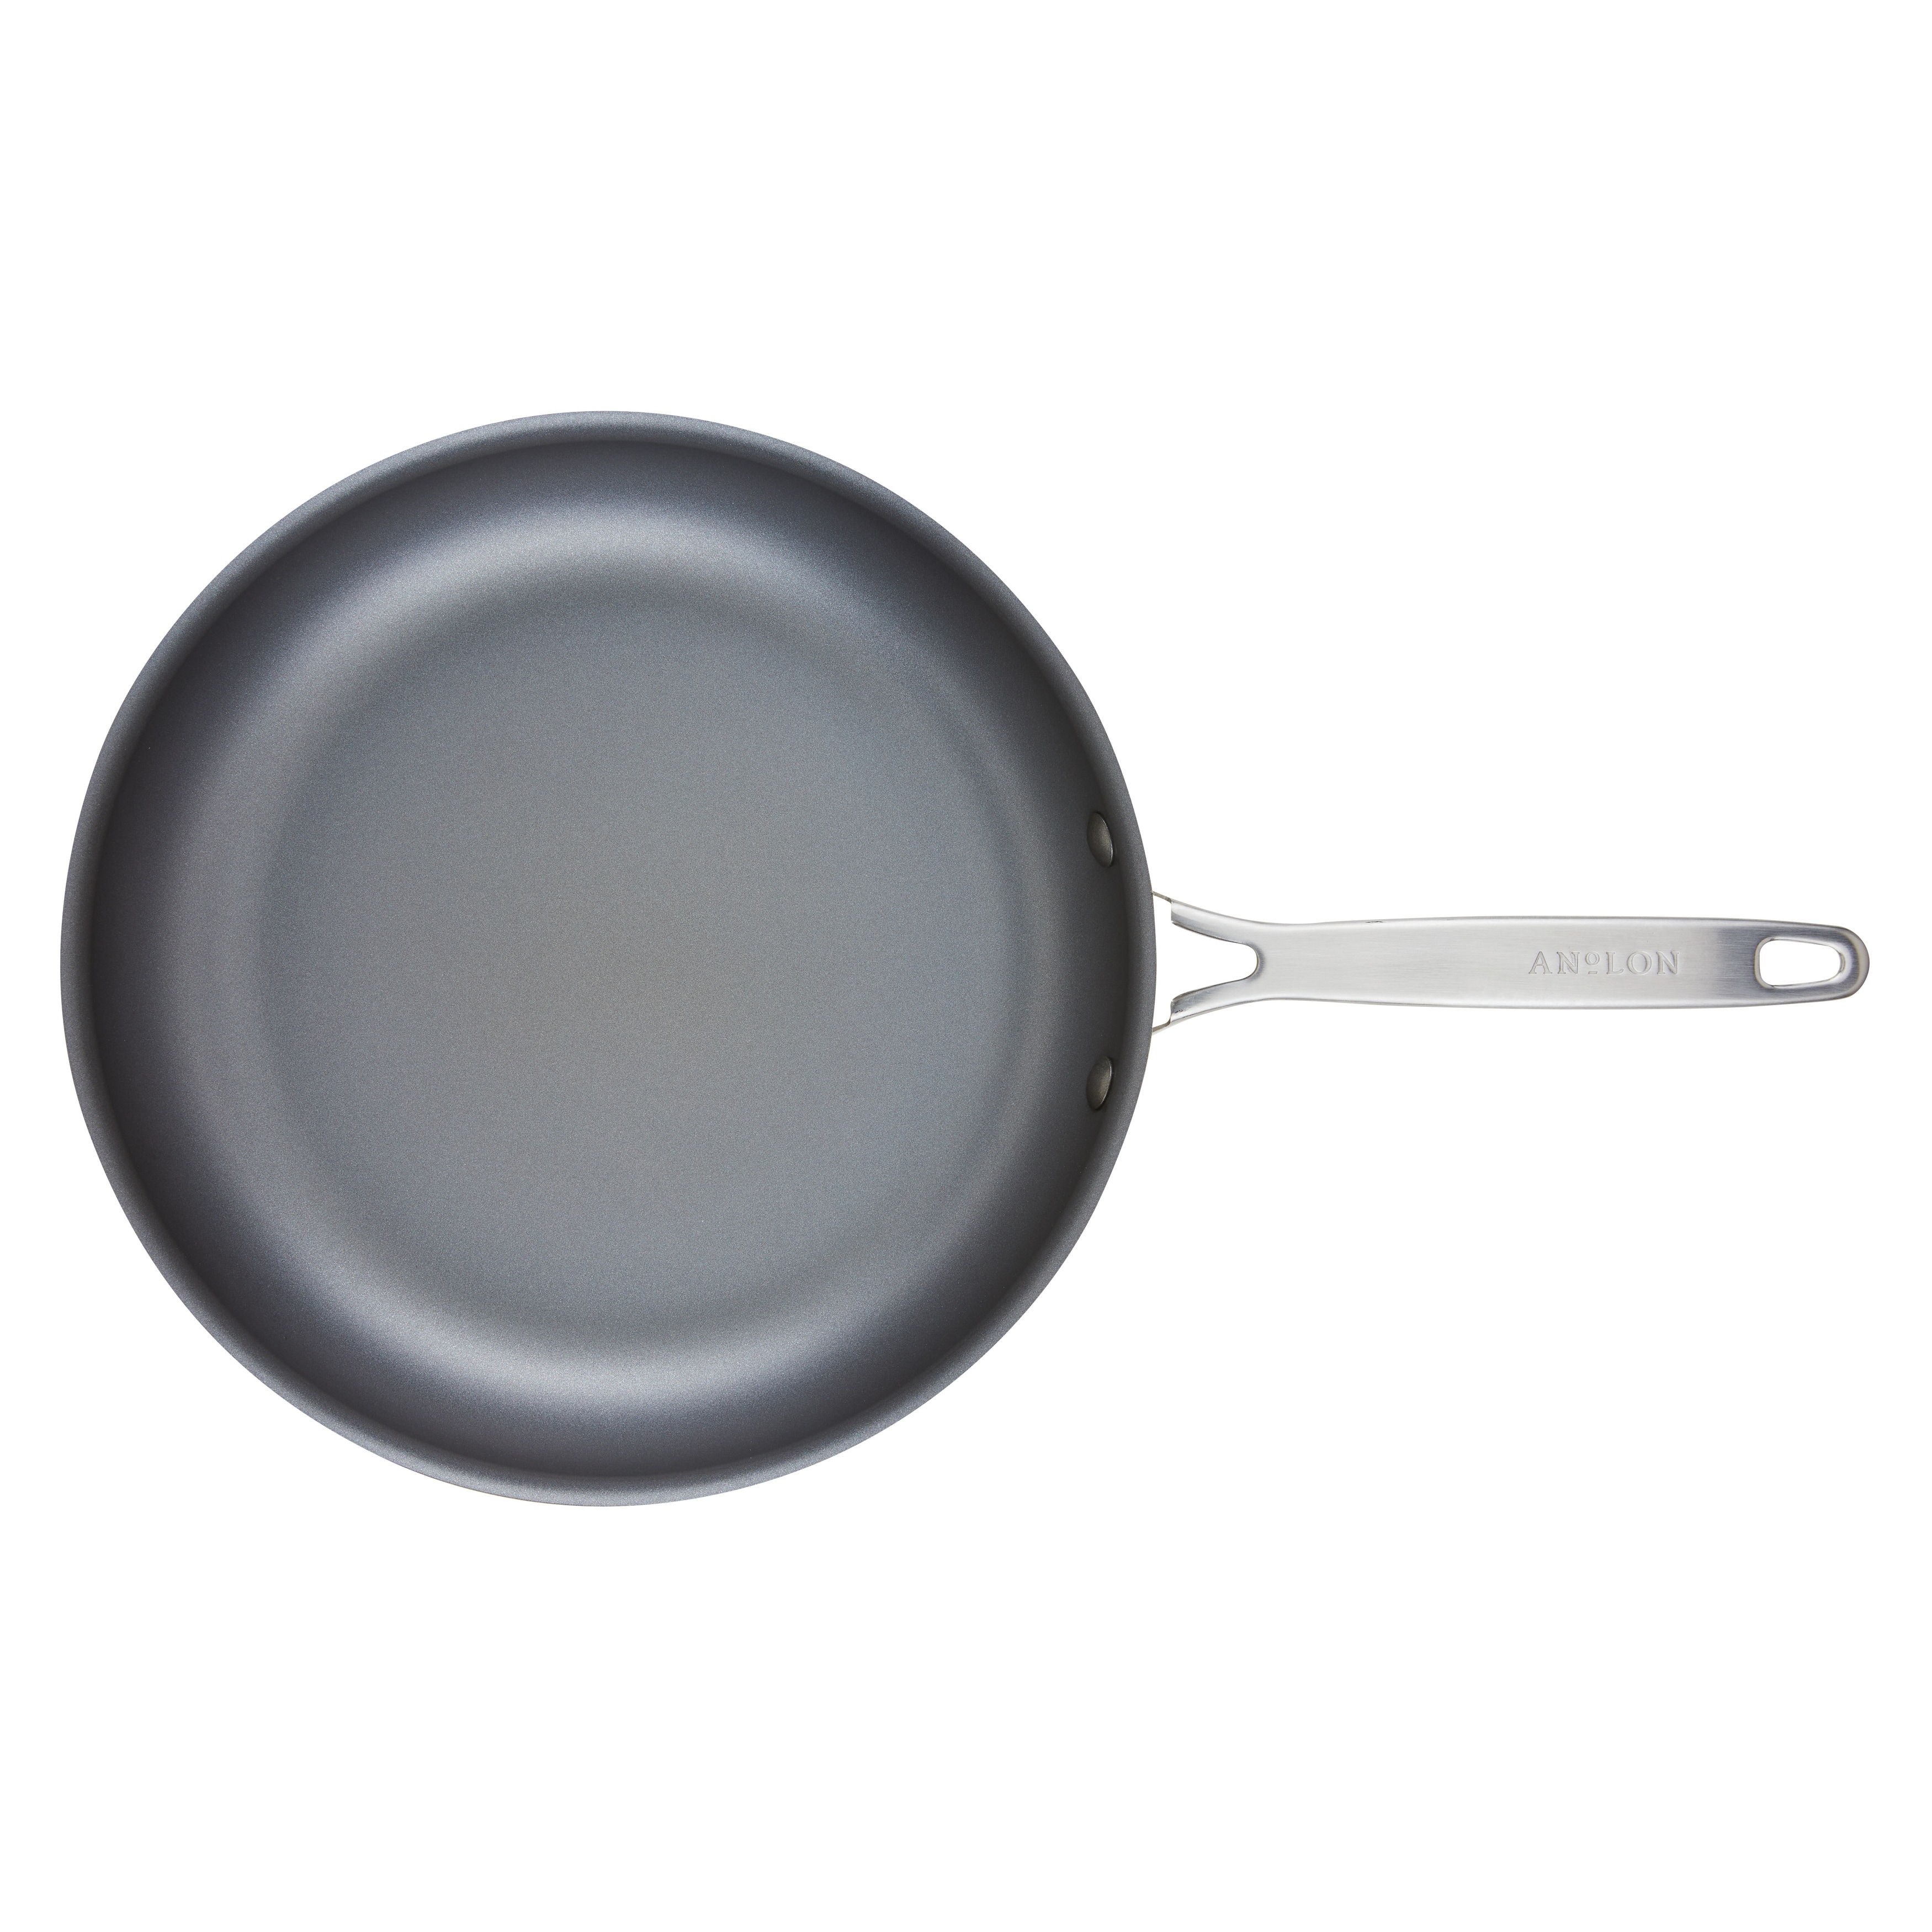 https://ak1.ostkcdn.com/images/products/is/images/direct/1ce1f38069043aef9bb76abb1d8d691308a0985e/Anolon-Achieve-Hard-Anodized-Nonstick-Frying-Pan%2C-12-Inch.jpg